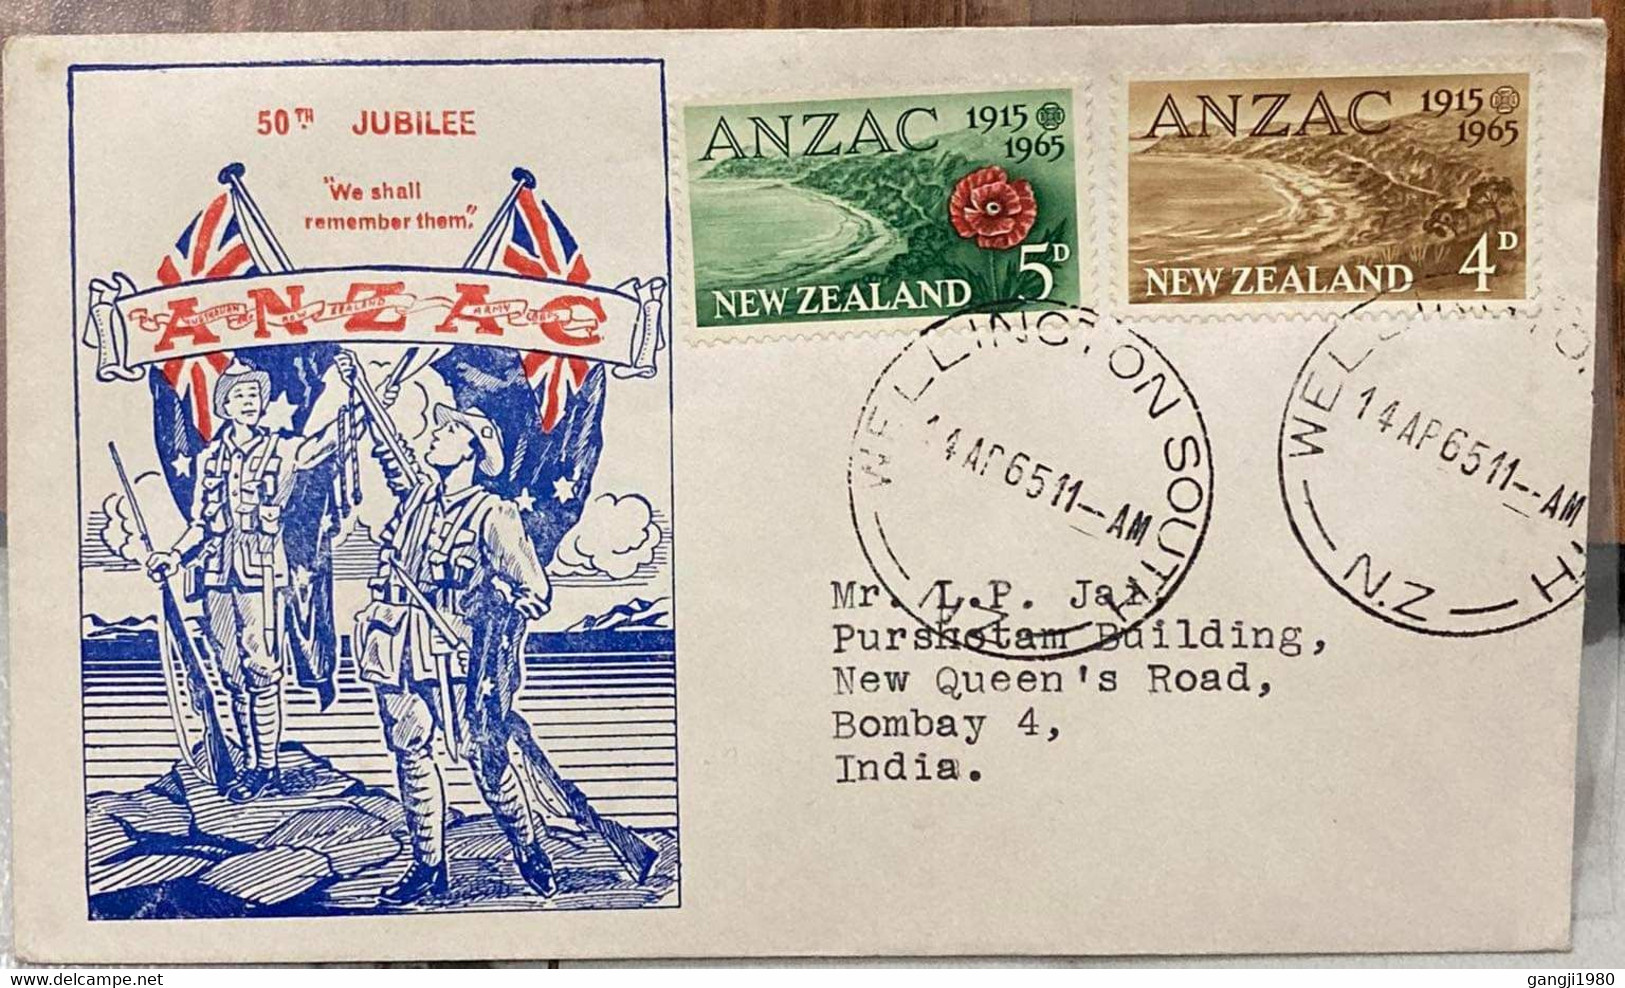 New Zealand,1965.private Fdc, ANZAC,welling Town South, POST MARK,TO ,INDIA,TO ADDRESS,L.P.JAI ,Cricketer. - Storia Postale